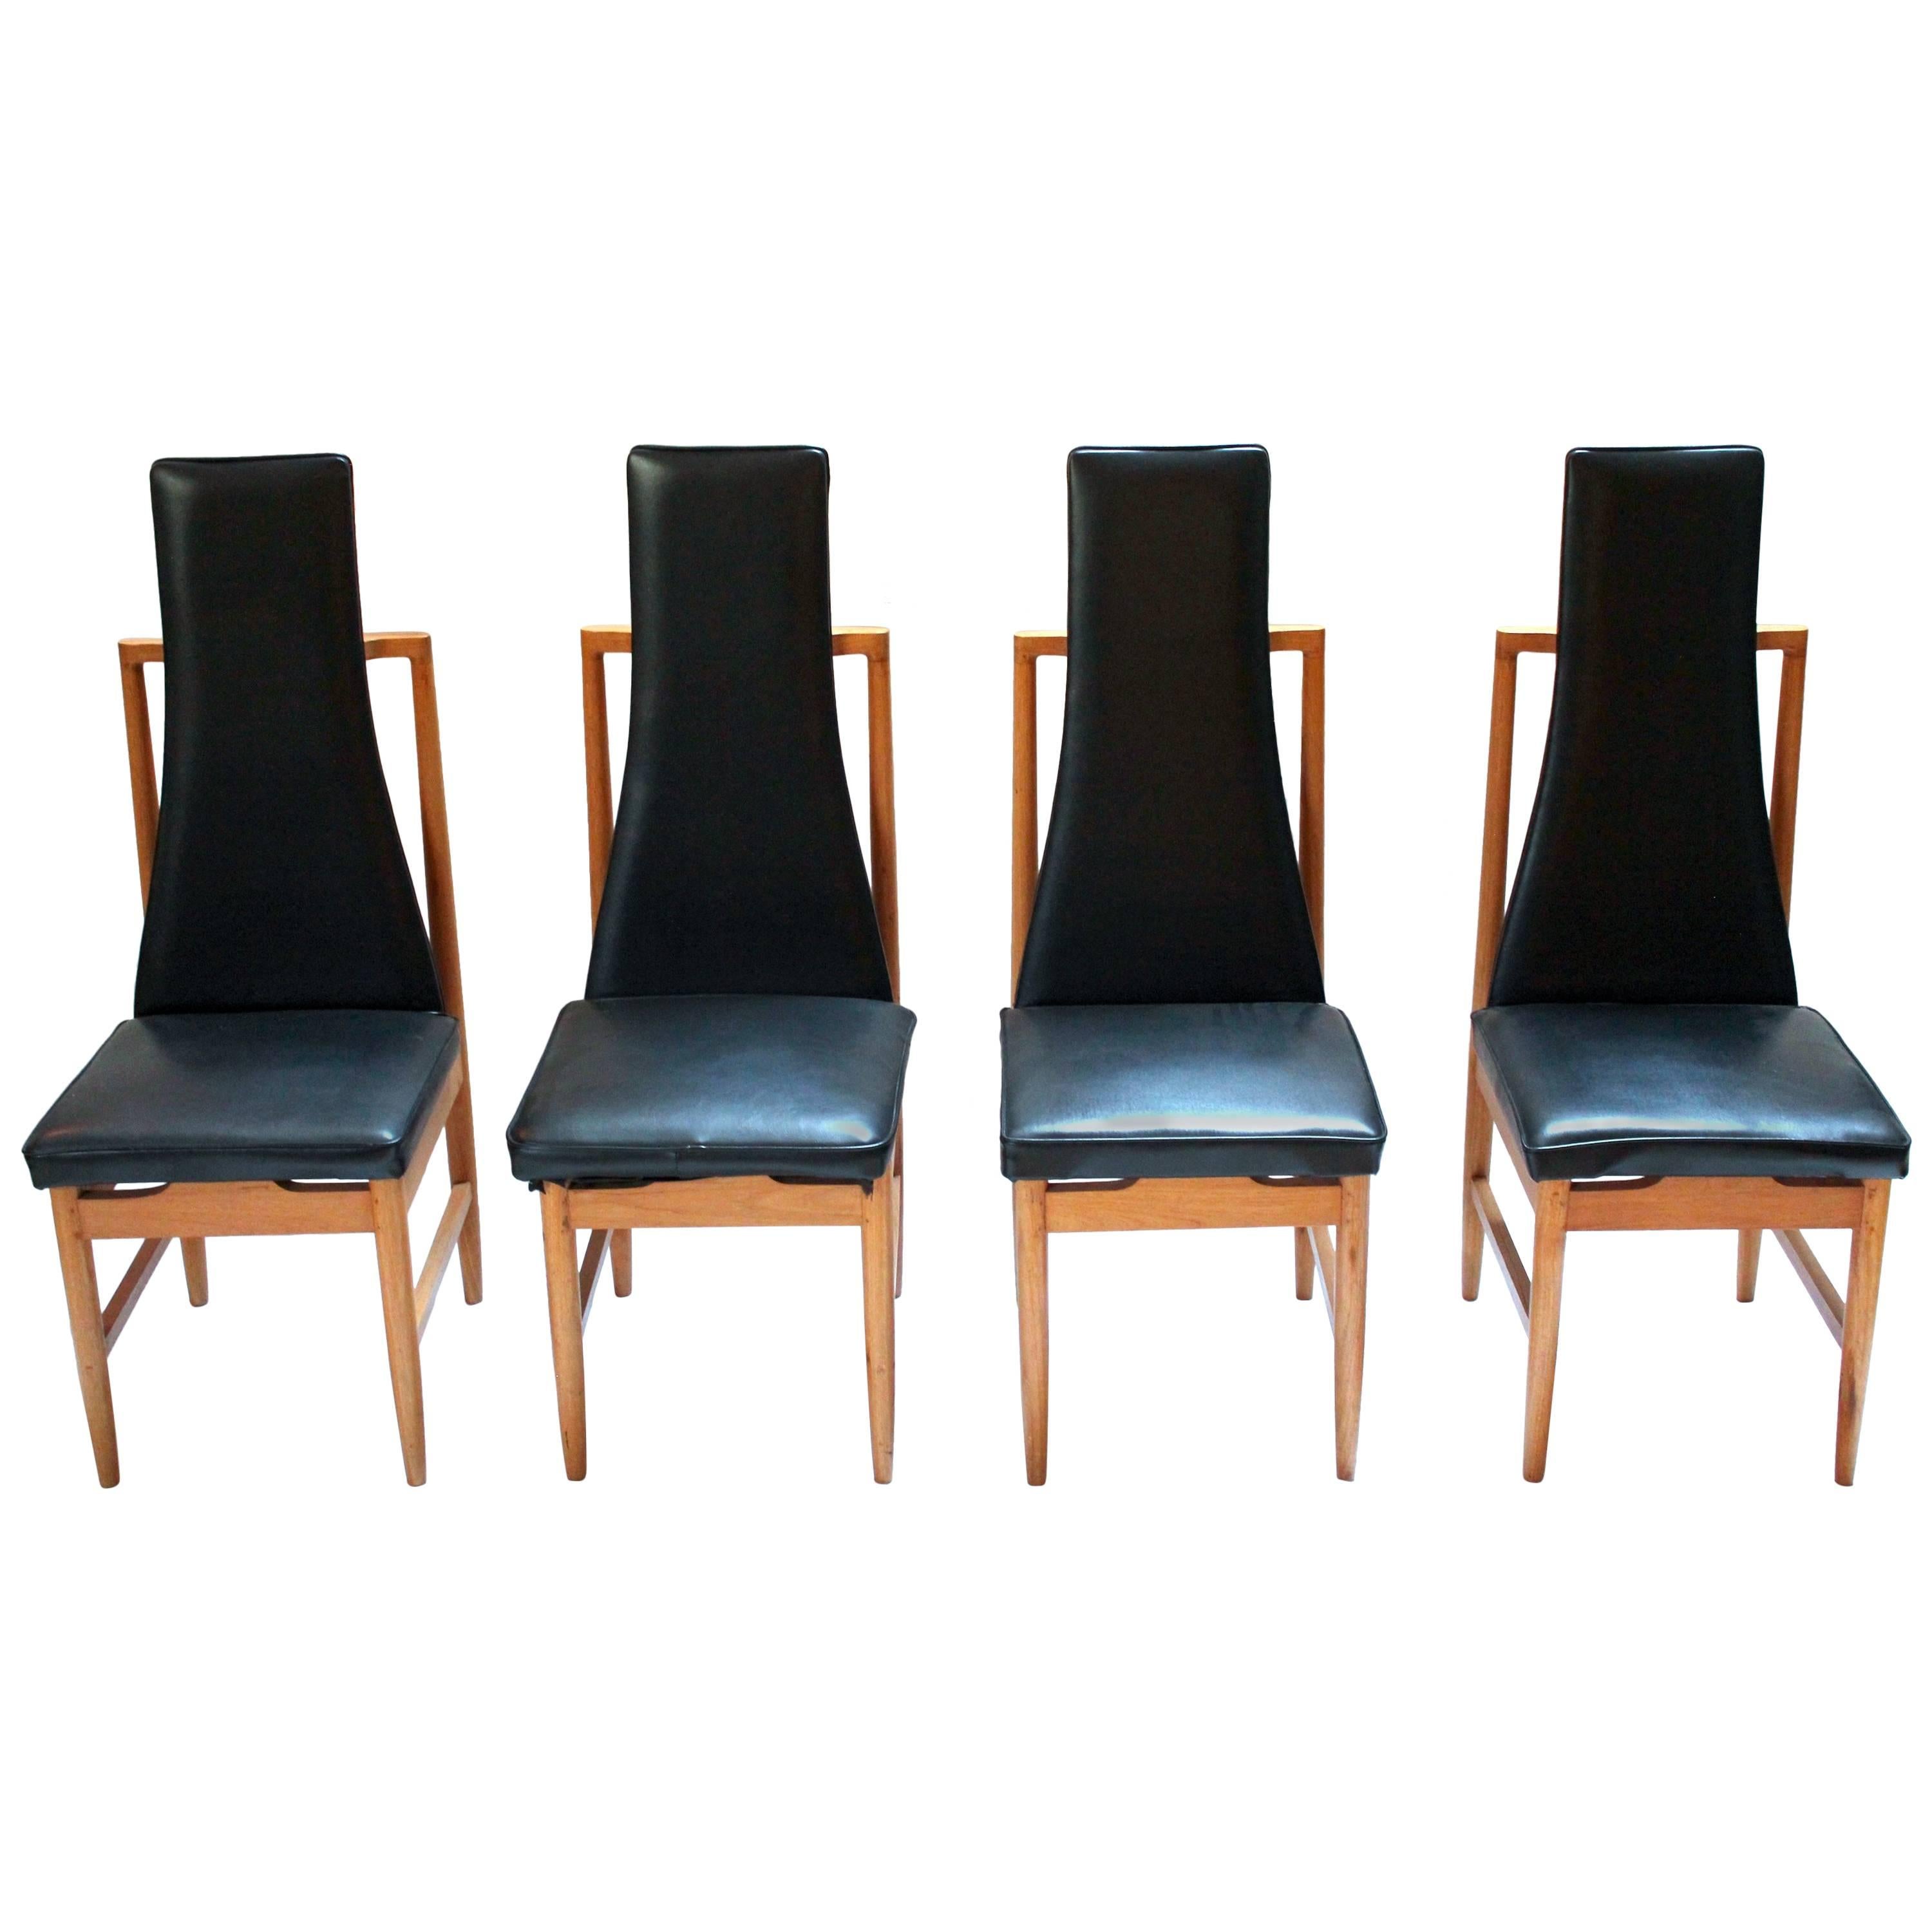 Set of Four Danish Modern Teak and Black Vinyl Tall-Back Dining Chairs For Sale